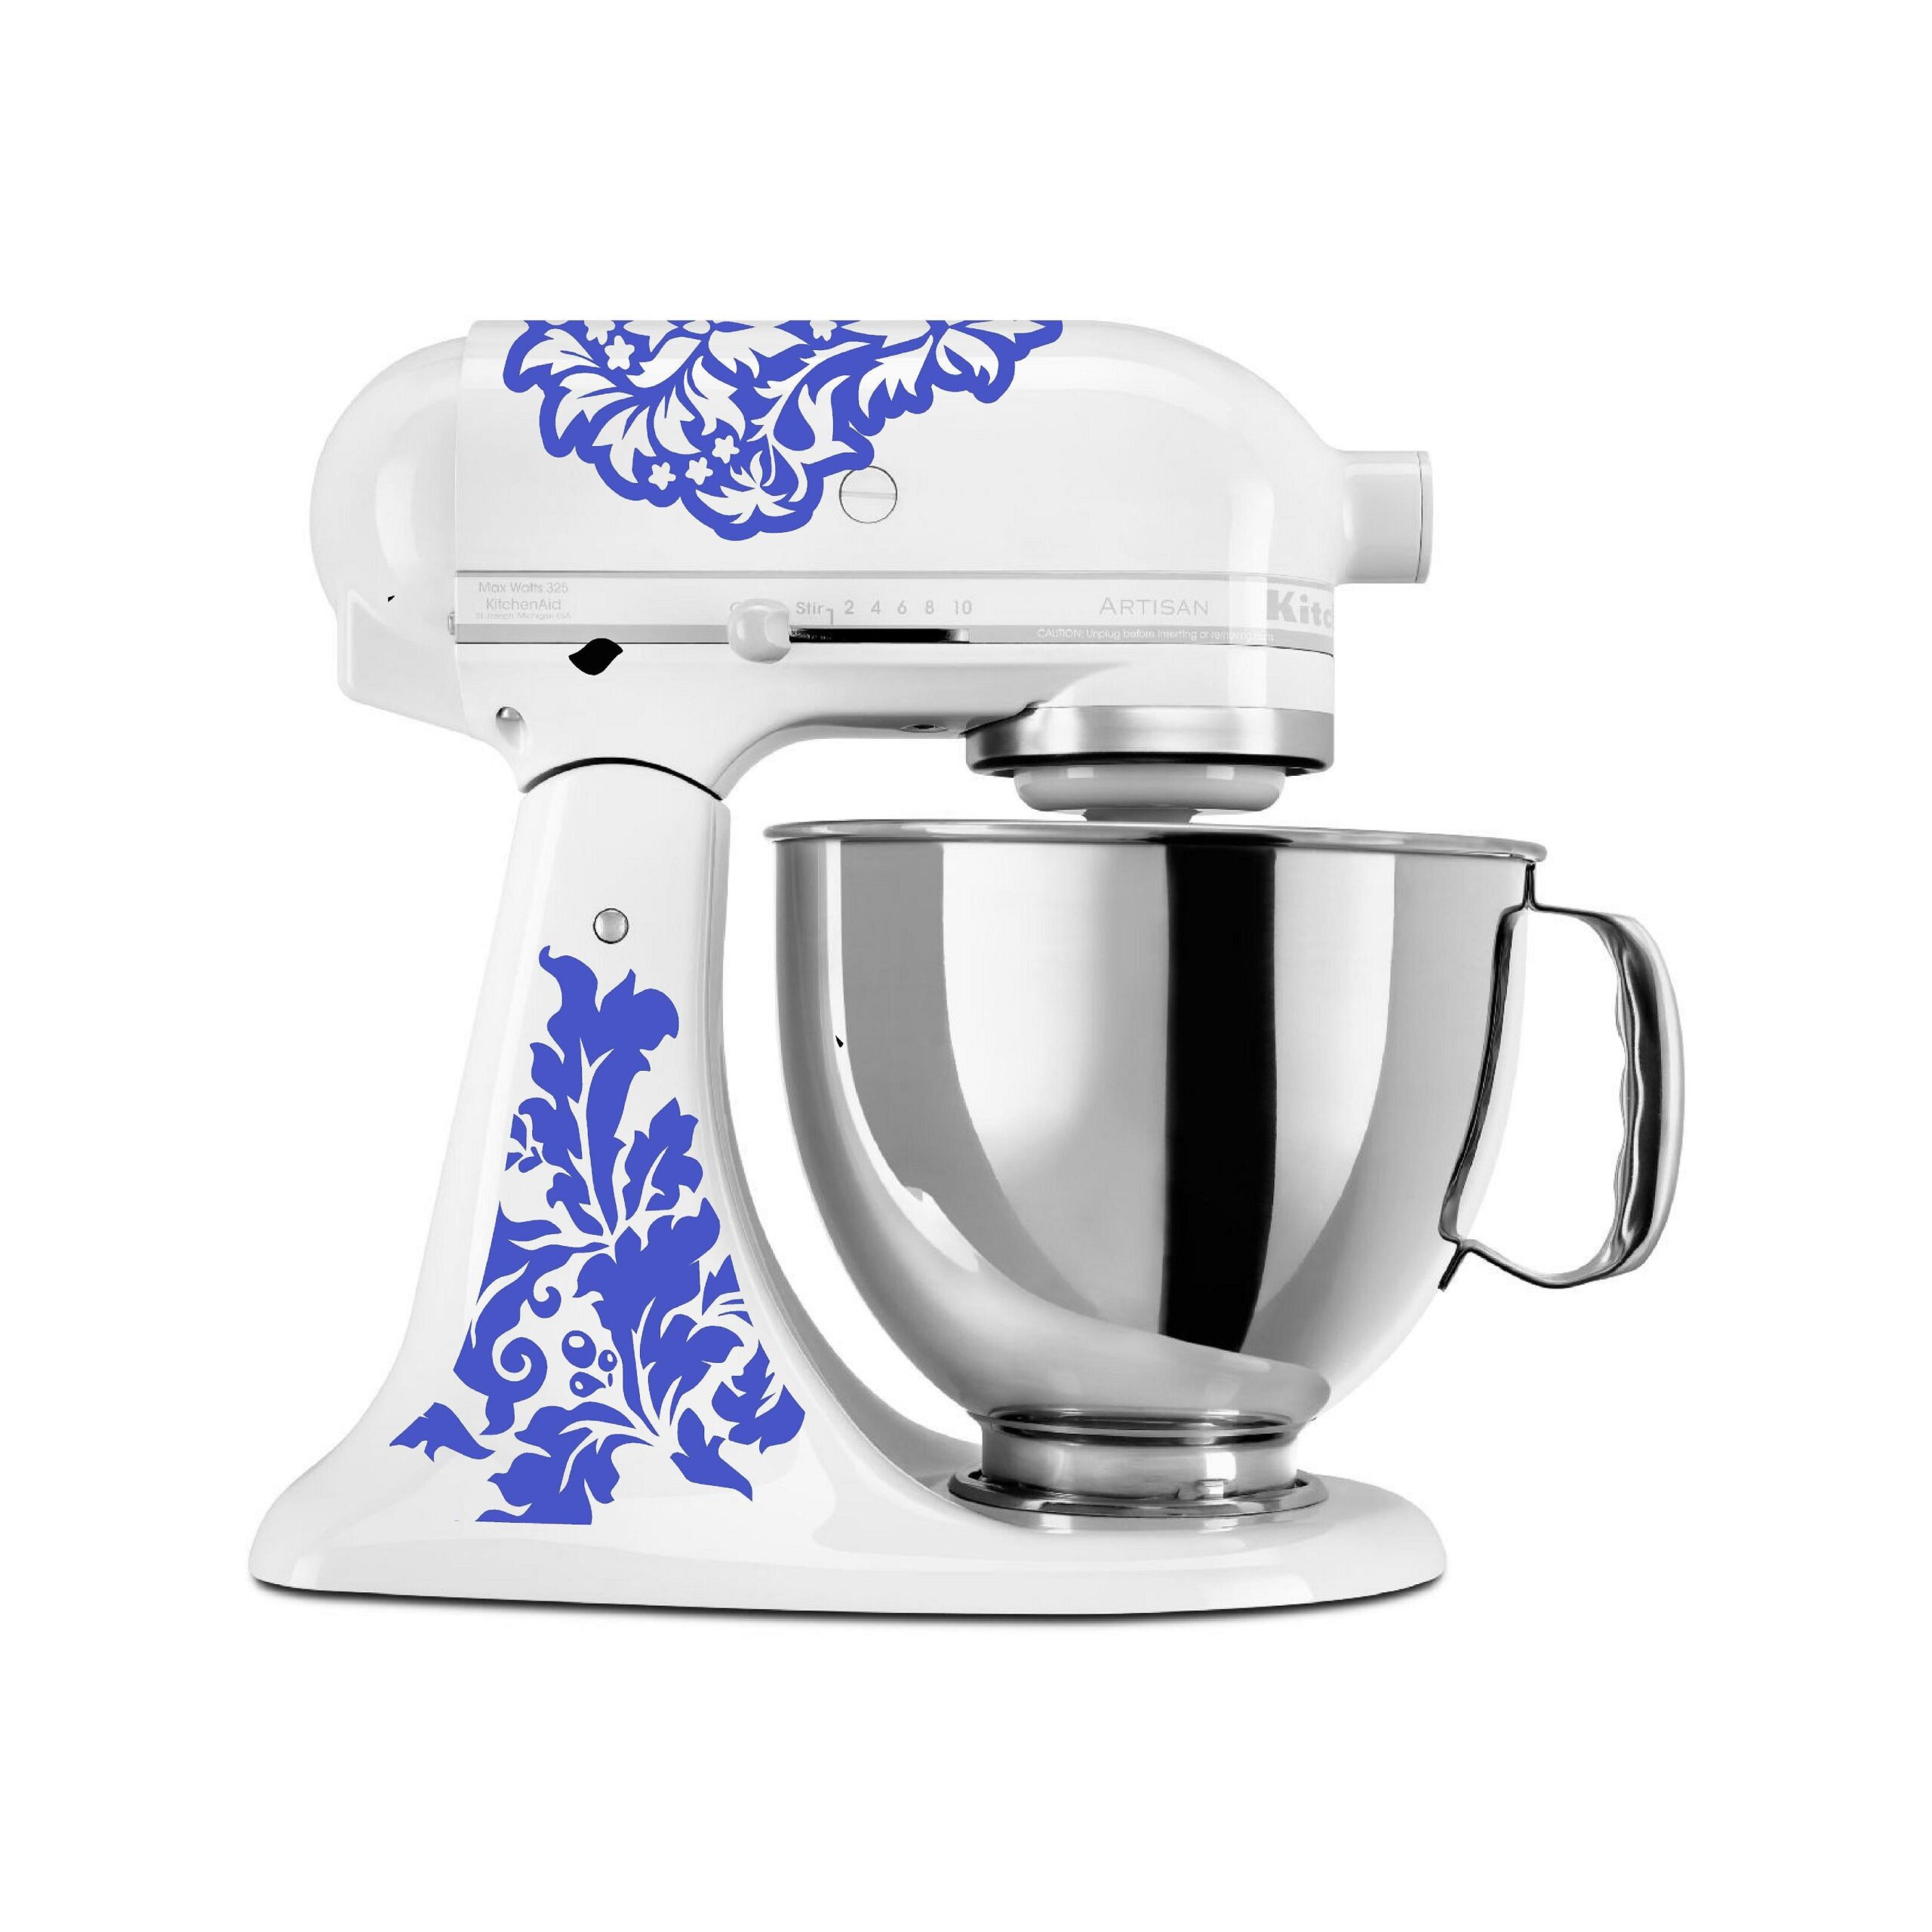 Personalized Decal for kitchenaid mixer- Decals, Kitchenaid, Deco